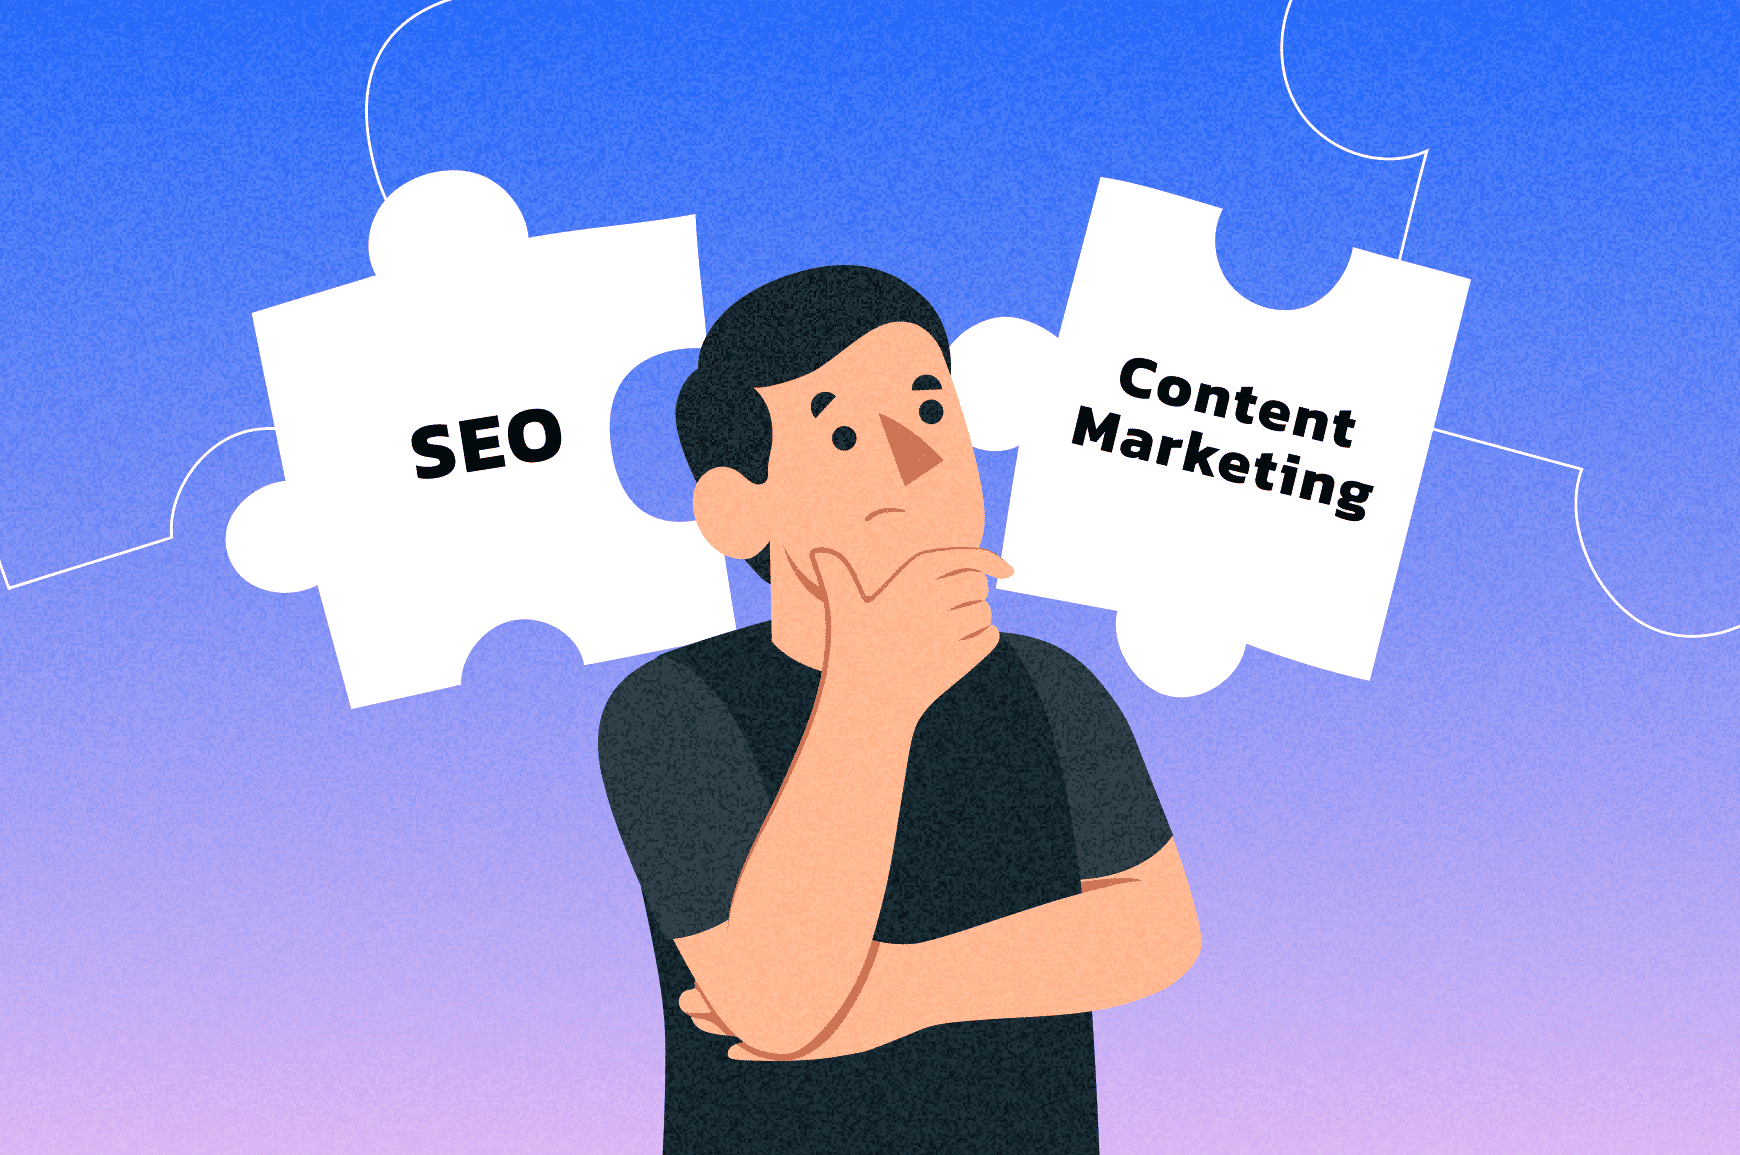 Confused man with “SEO” and “Content Marketing” written on puzzle pieces behind him